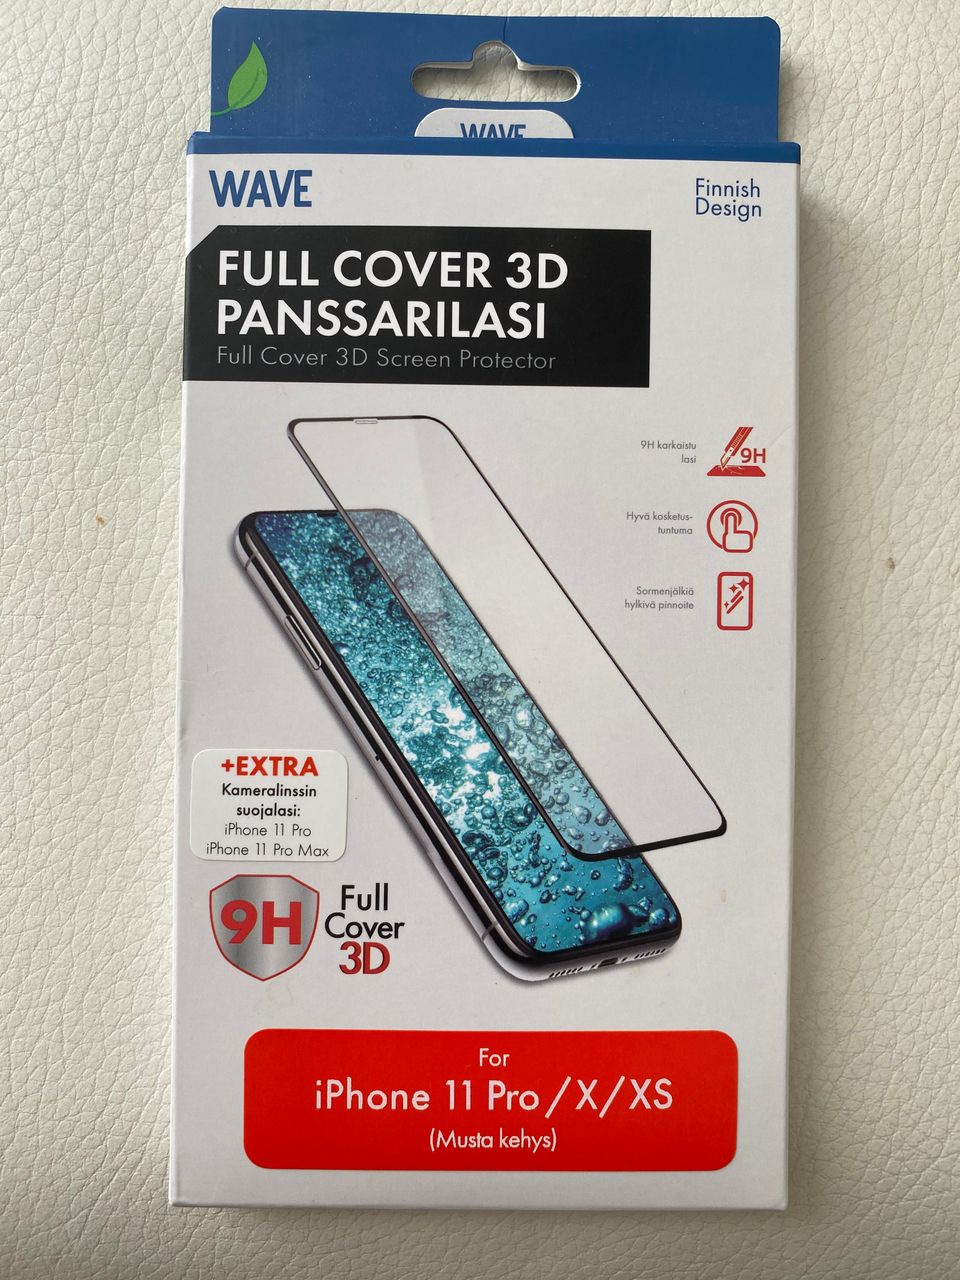 Wave Full Cover 3D Panssarilasi, Apple iPhone 11 Pro / X / XS